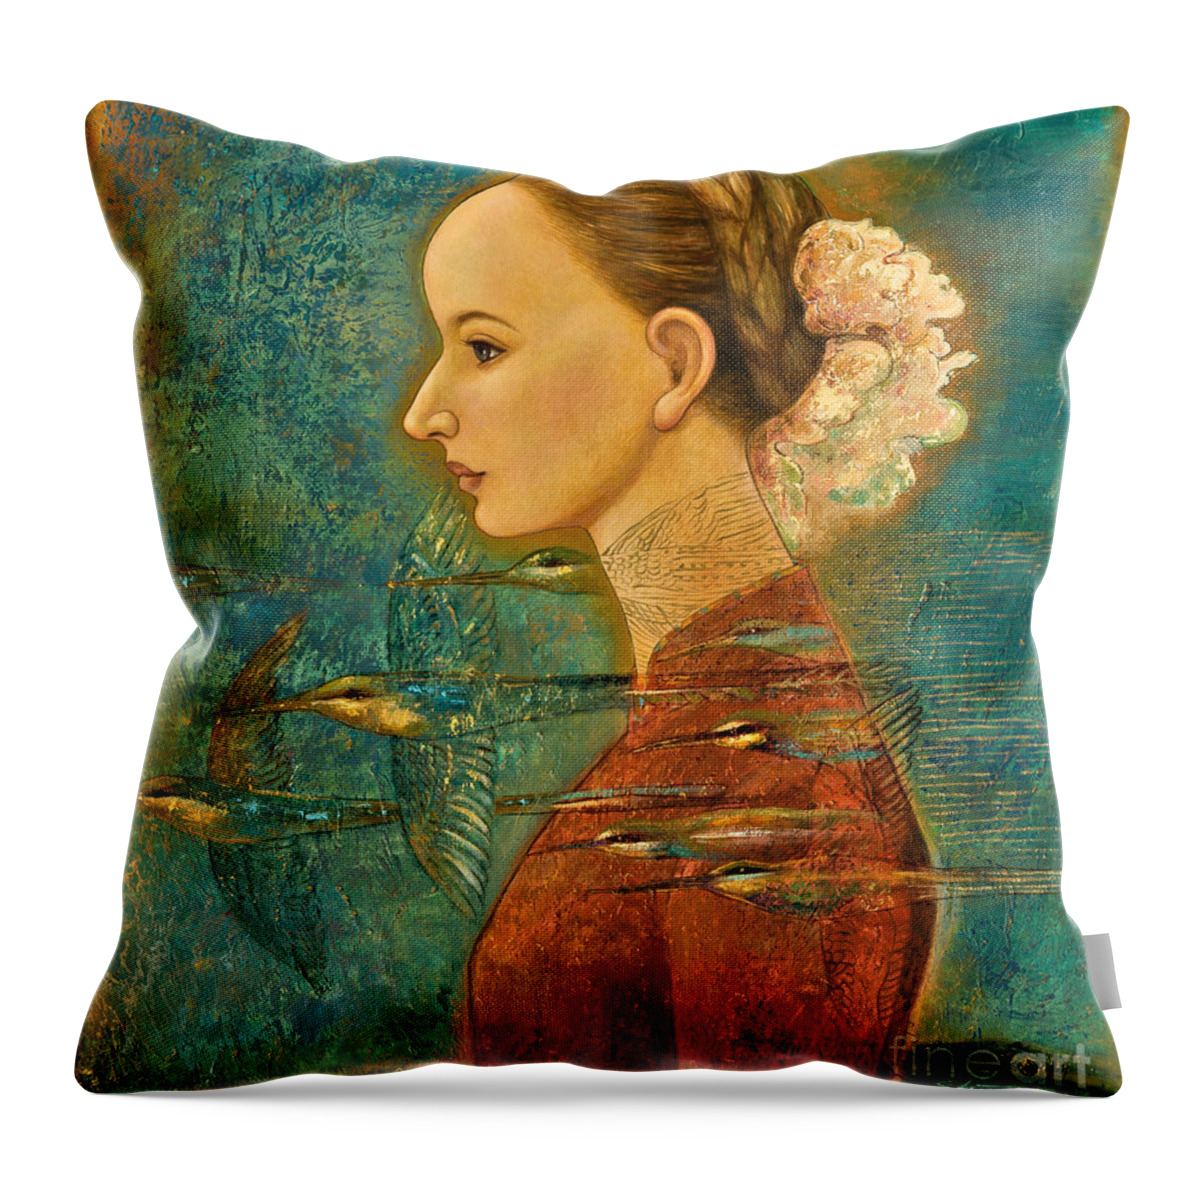 Figurative Throw Pillow featuring the painting Summer Song by Shijun Munns